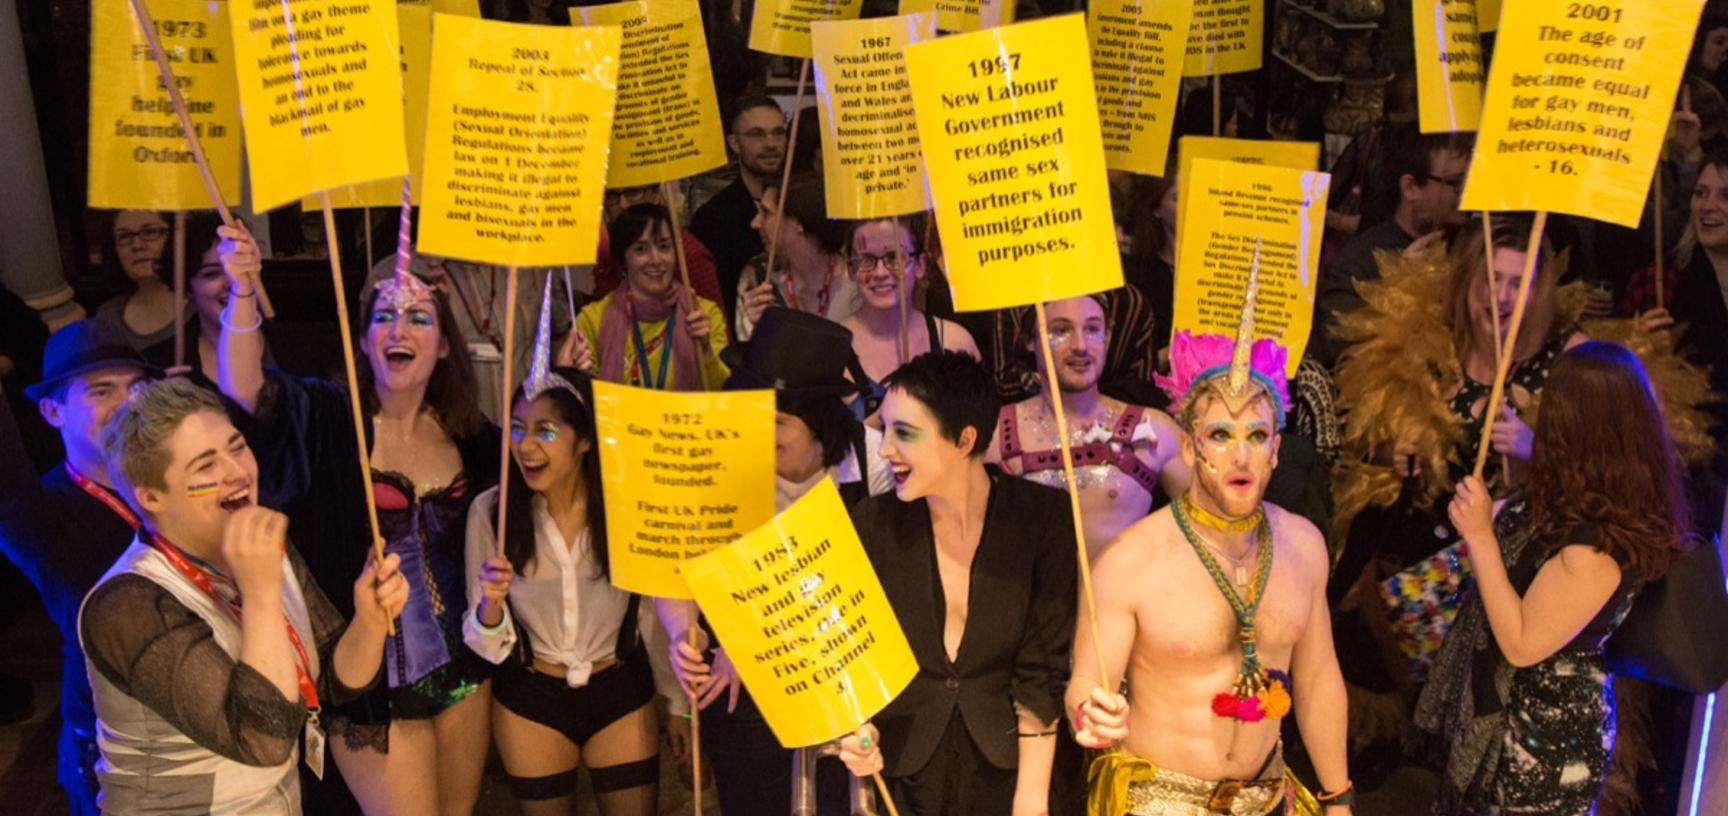 Party at the Pitt, 2017. More than four hundred people attended this flagship event for ‘Out in Oxford’, an initiative to reveal and celebrate the LGBTQ+ stories held within the University of Oxford’s museums and collections.